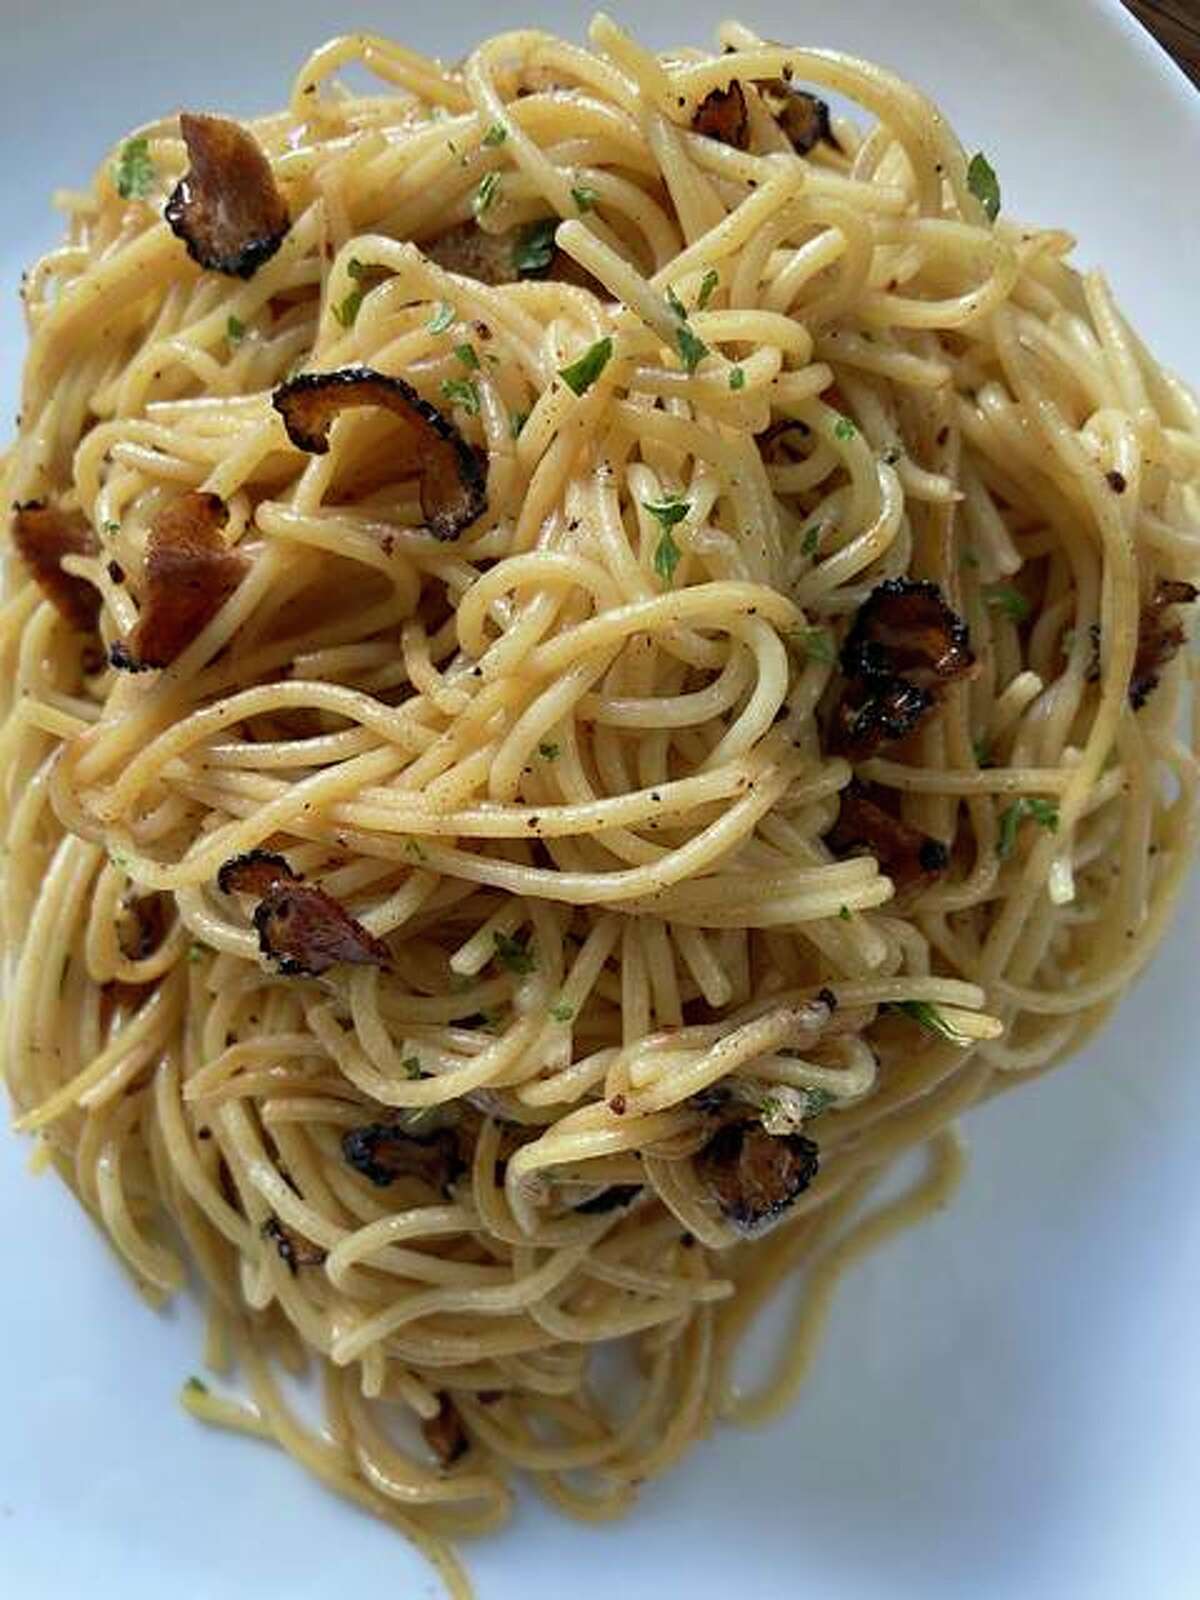 Rachel Tritsch cooks the flavorful but rare black truffle, paired with pasta.